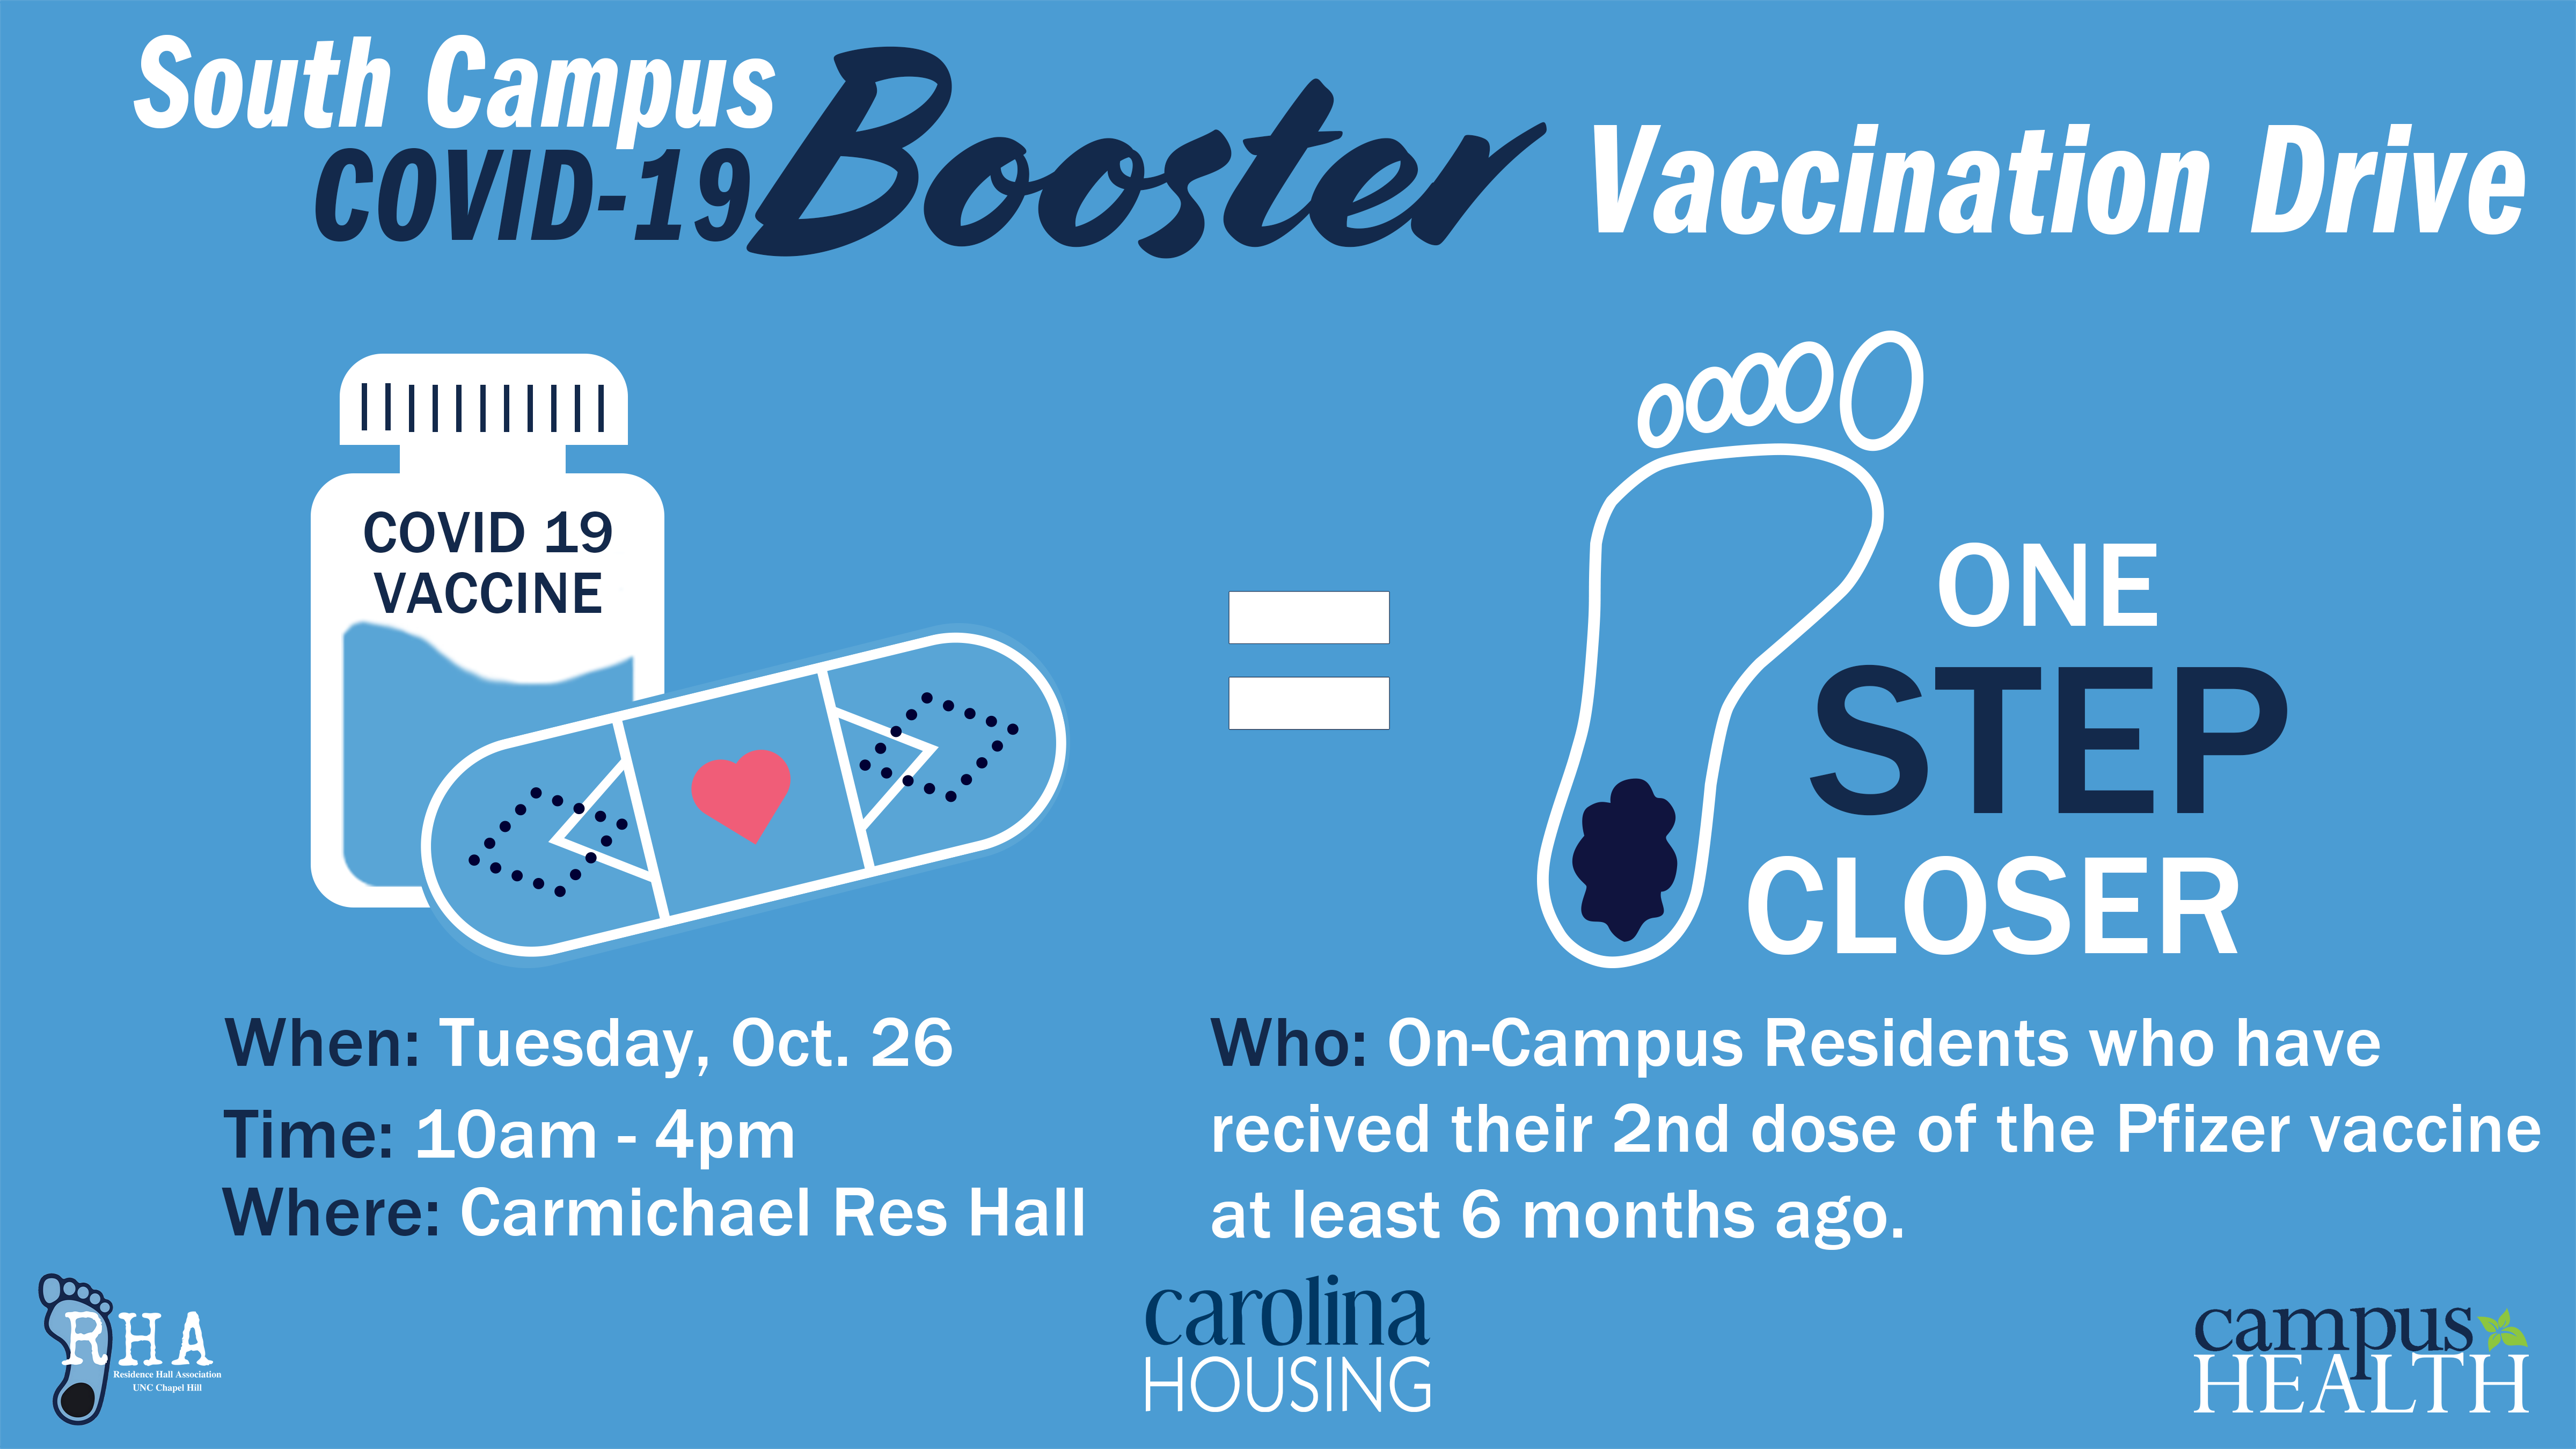 South Campus COVID-19 Booster Vaccination Drive Monday Oct 26 10 am - 4 pm Carmichael Res Hall for On-Campus Residents who have received their 2nd dose of the Pfizer vaccine at least 6 months ago